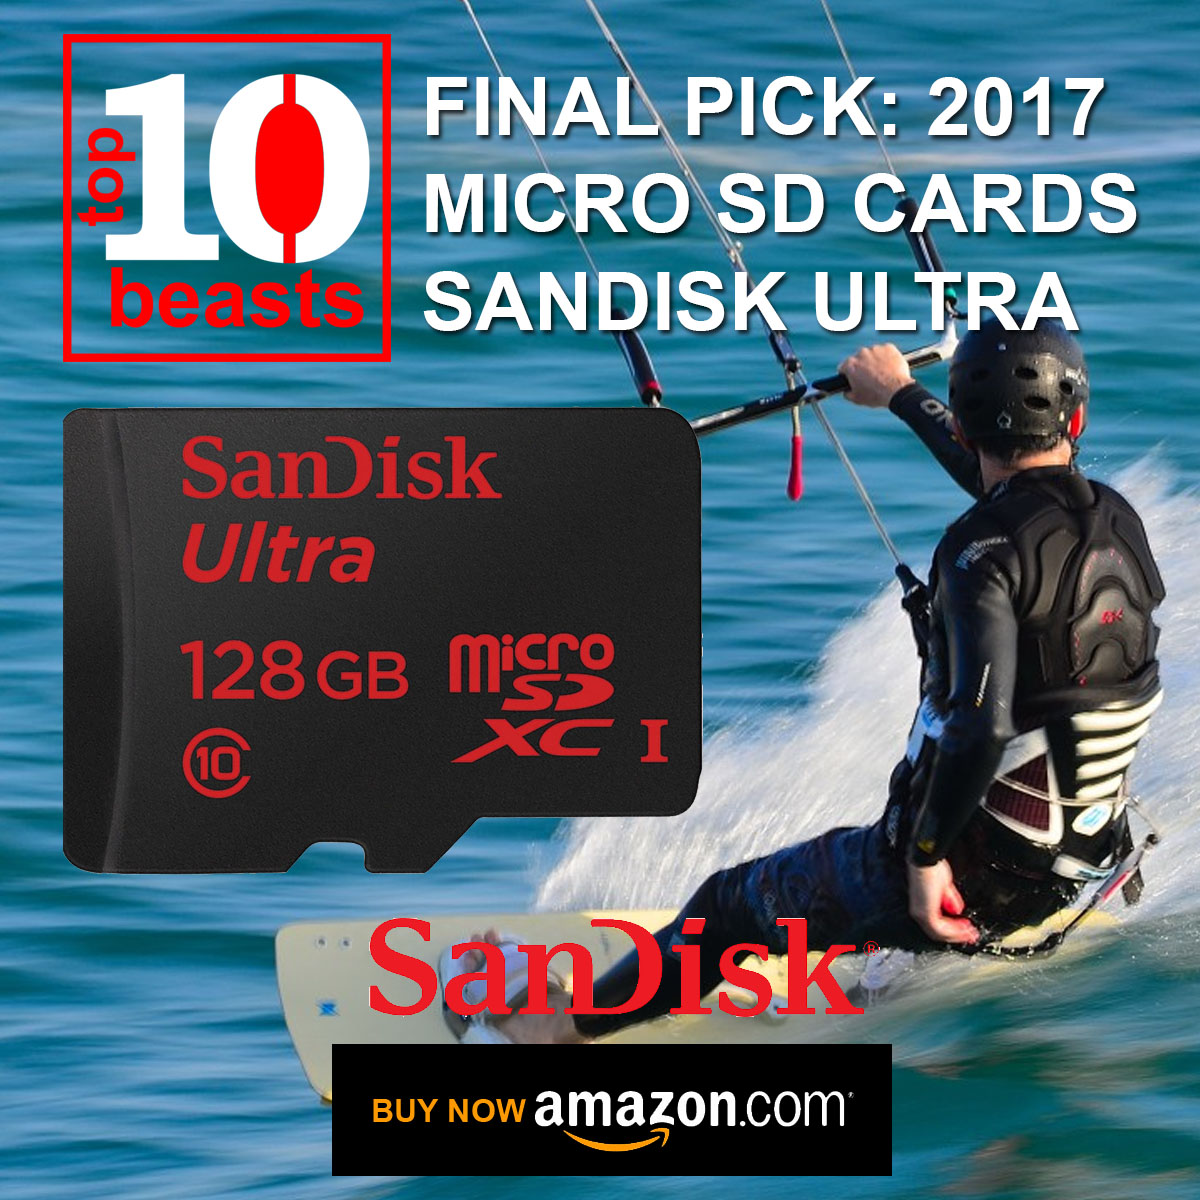 No.1 SanDisk ultra 129m GB Micro SD Best SD & Micro SD Cards 2017: Top 10 Beasts